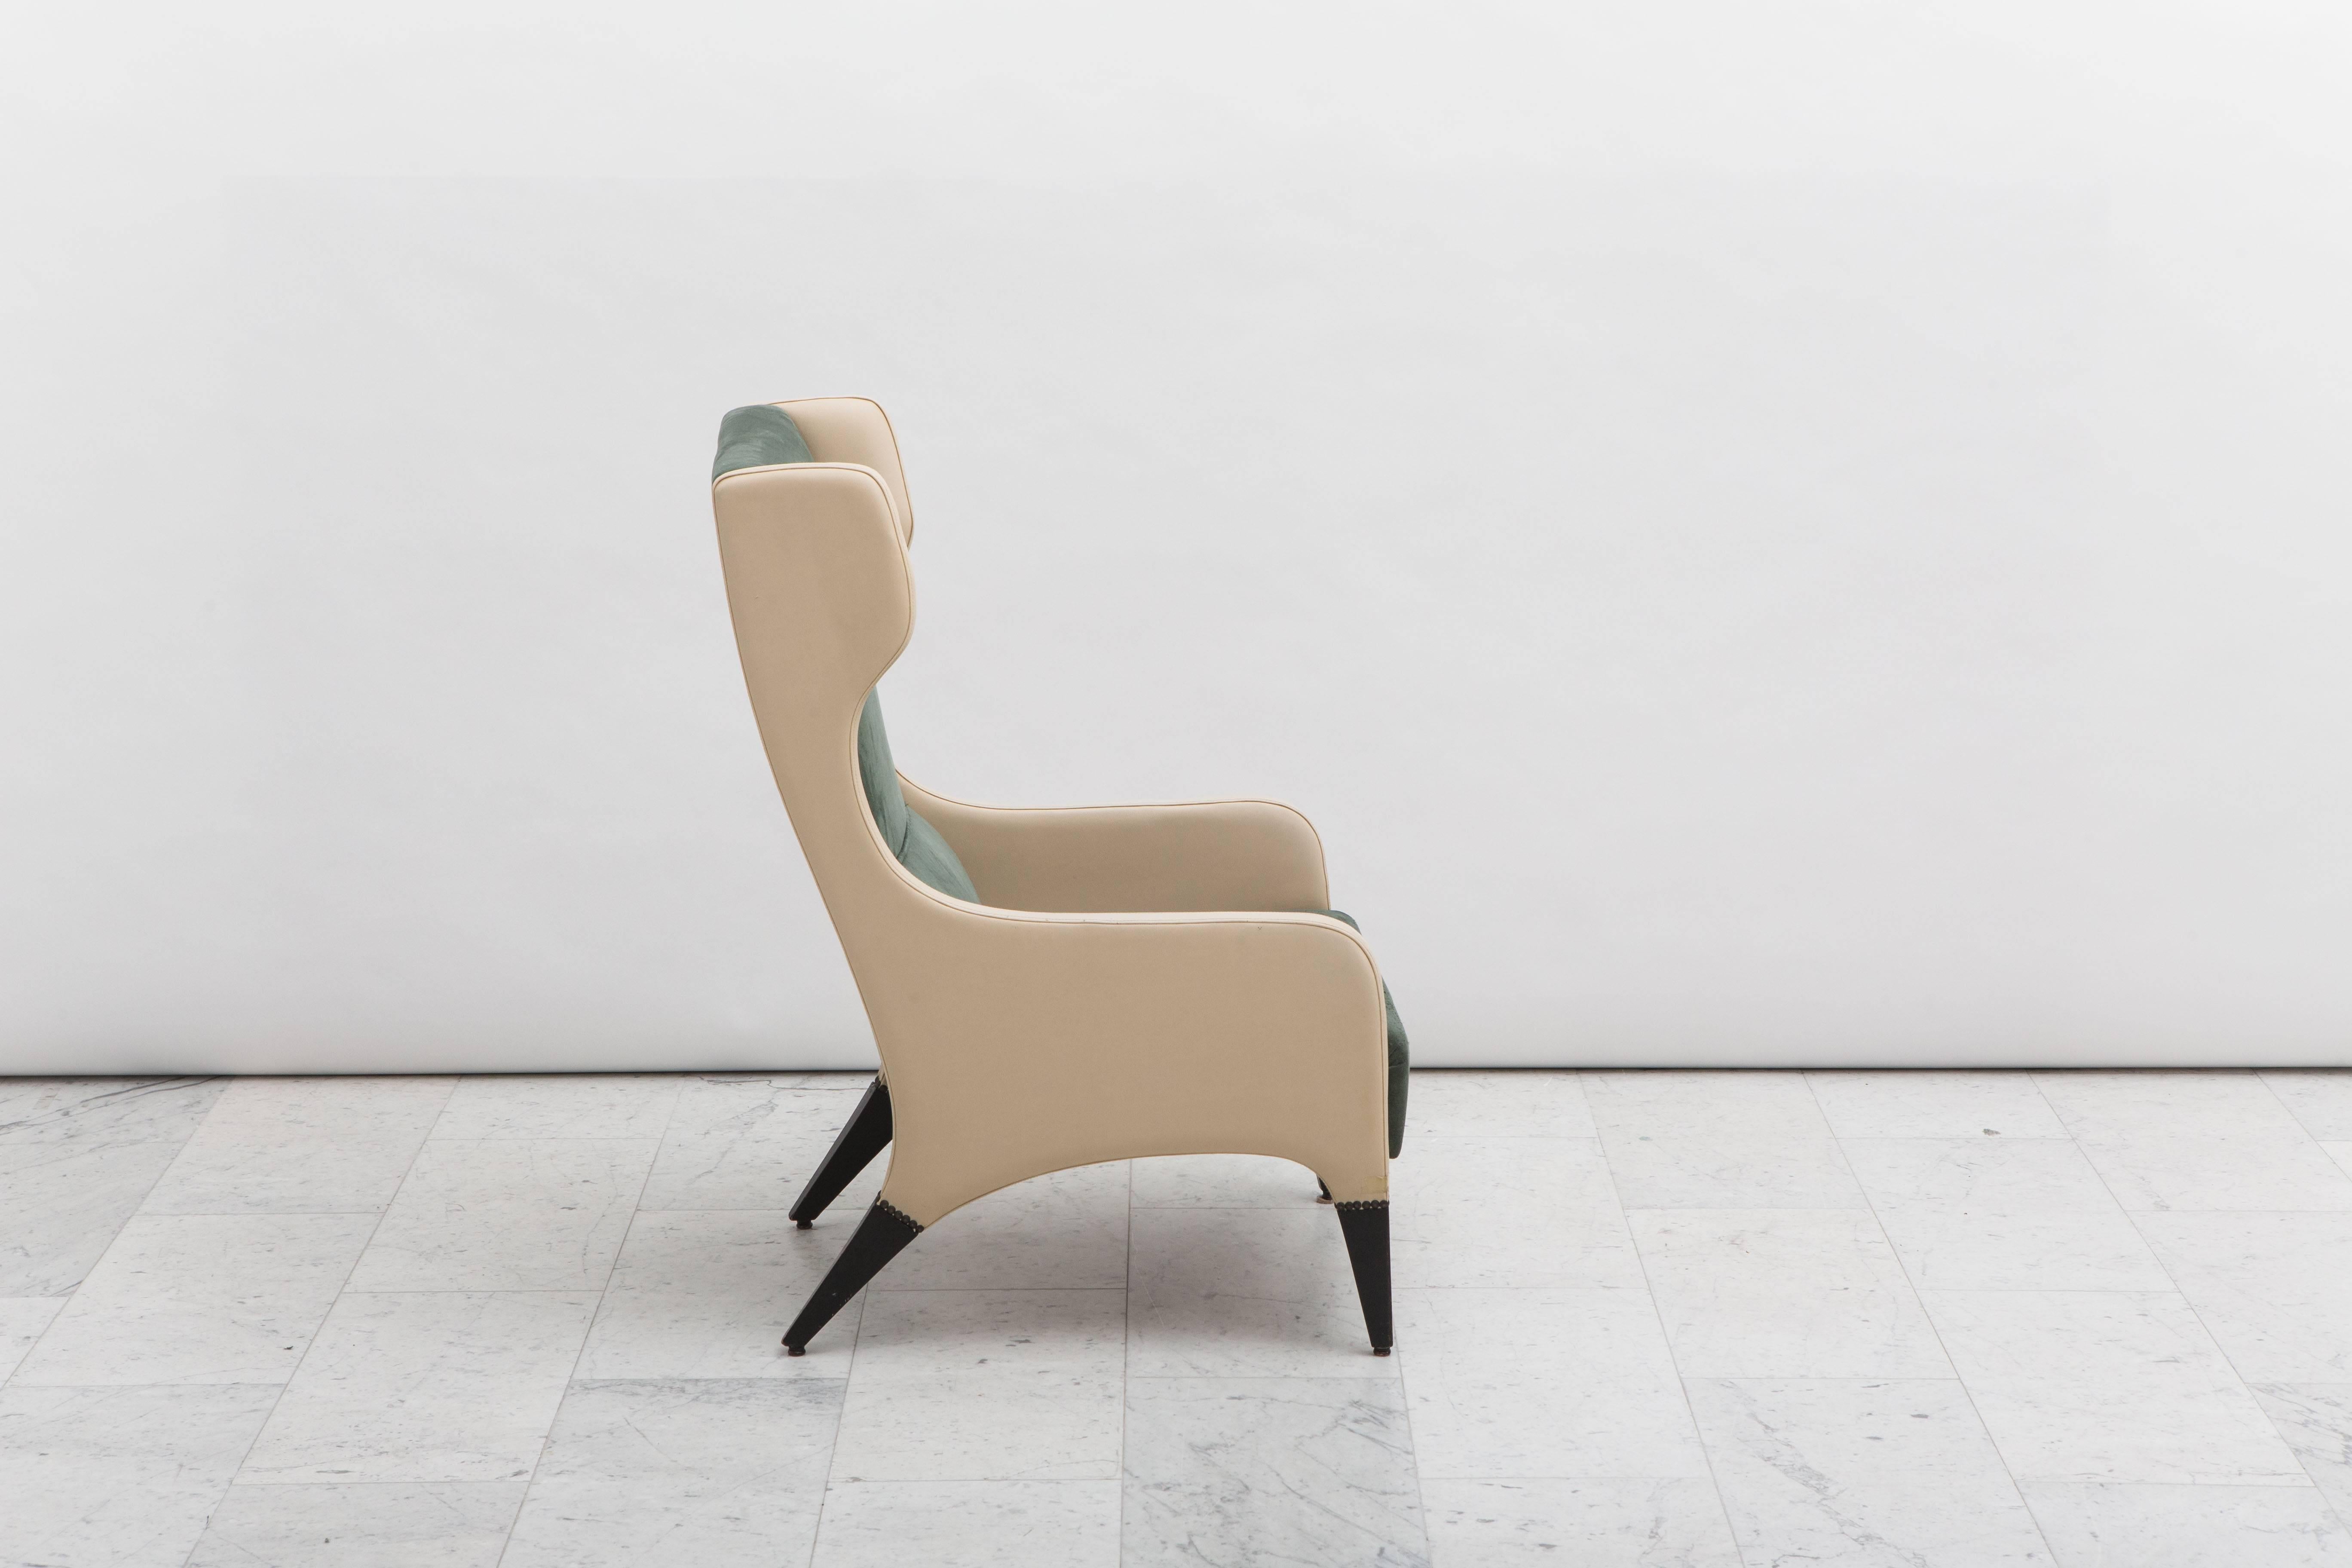 A pair of original Gio Ponti walnut and upholstered armchairs designed and made for the iconic Parco Dei Principi Hotel in Rome, Italy.
Elegant and demure in design, they are an excellent example of the Italian designer and architect’s master